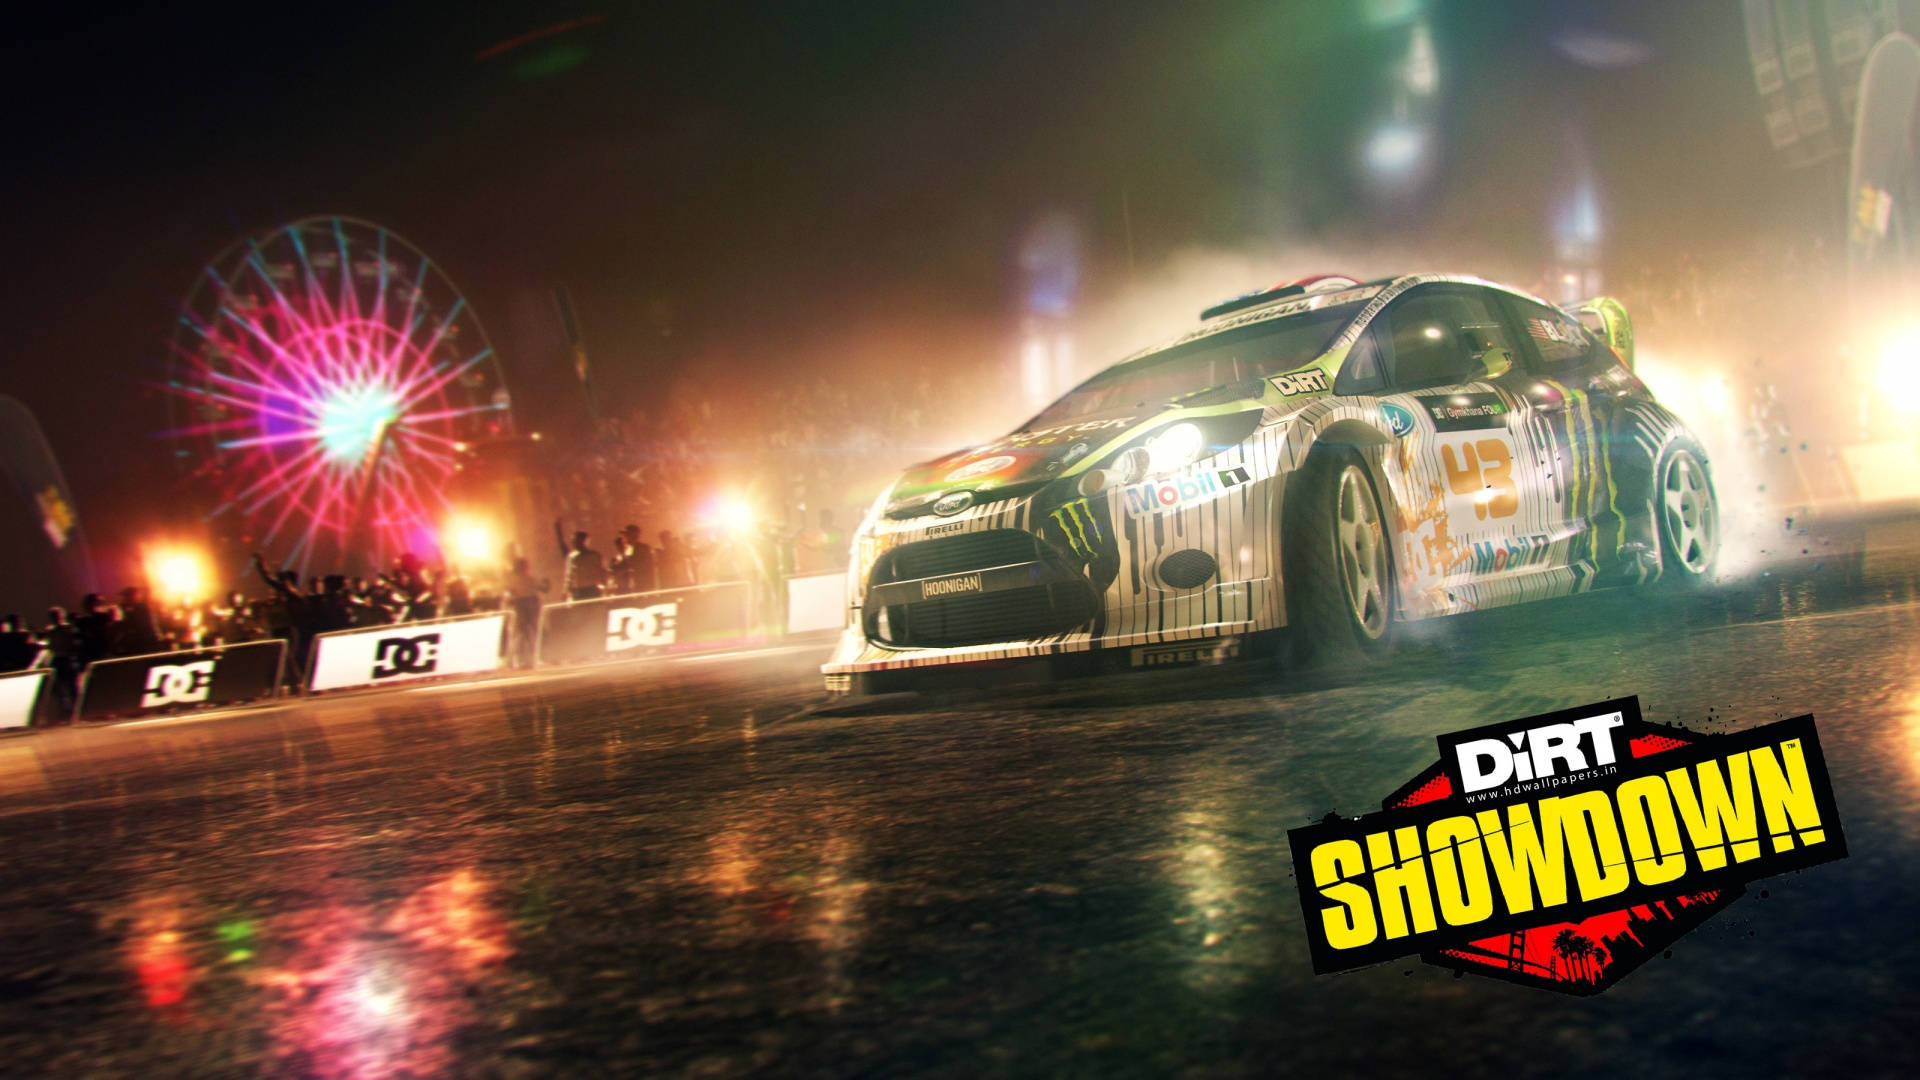 High-octane Action In Dirt Showdown Video Game Poster Background